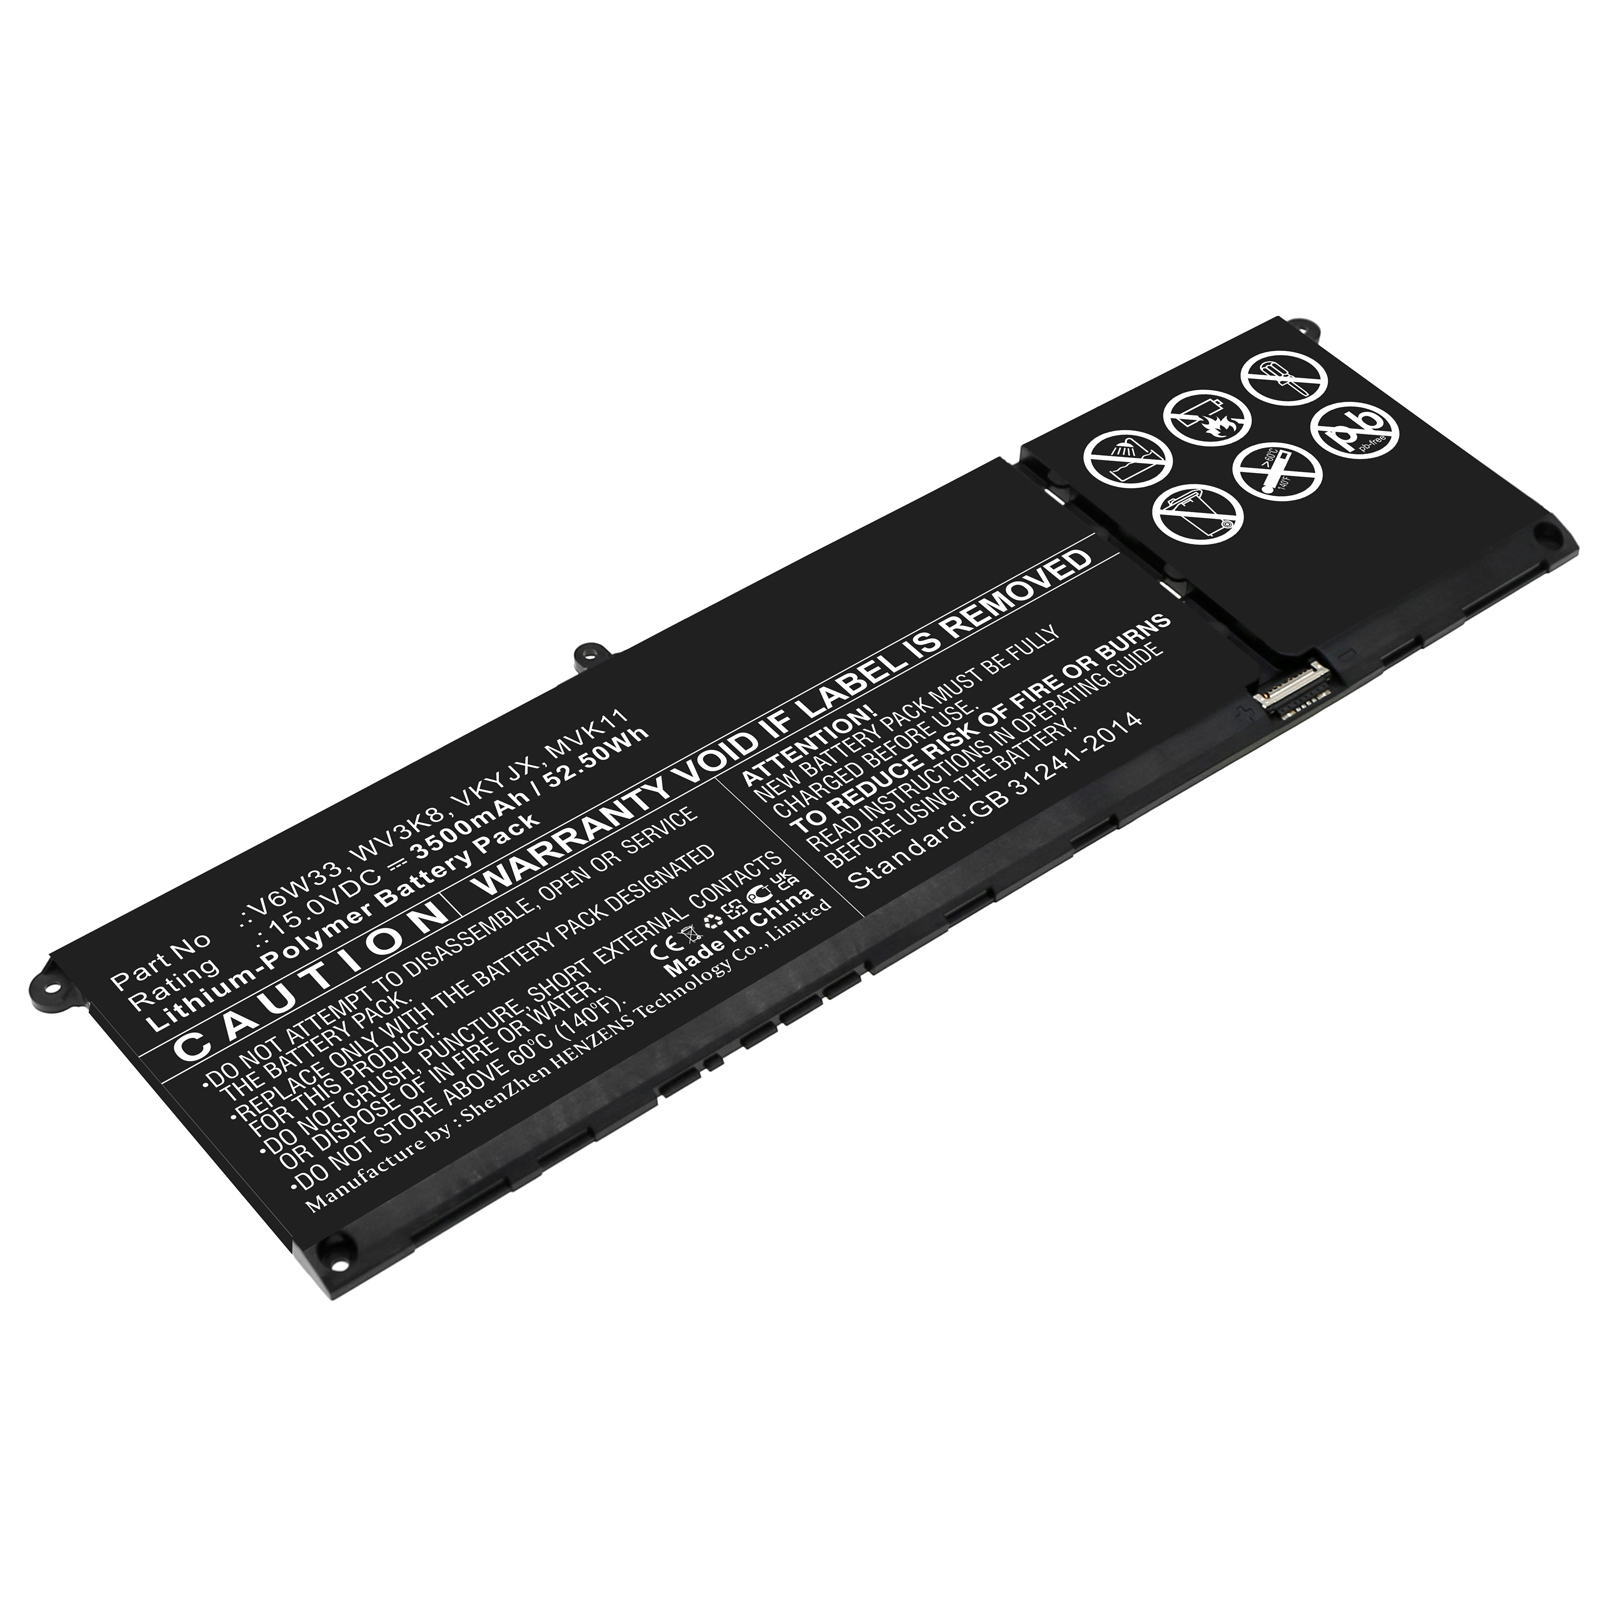 Synergy Digital Laptop Battery, Compatible with DELL 927N5 Laptop Battery (Li-Pol, 15V, 3500mAh)